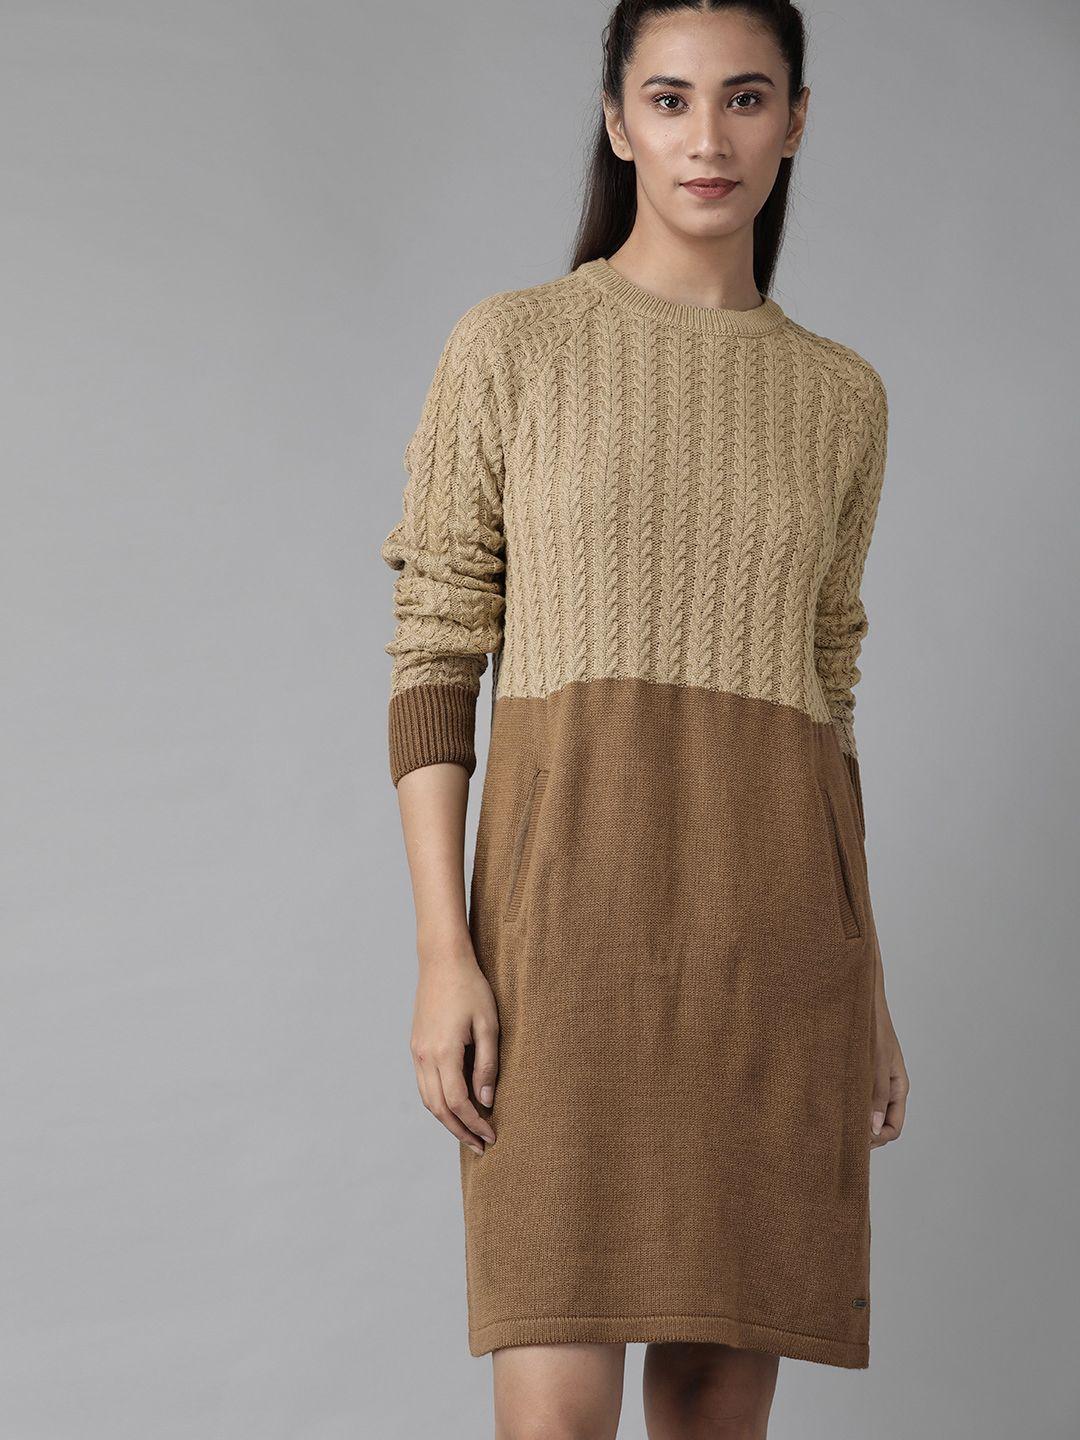 roadster women beige & brown colourblocked cable knitted jumper dress